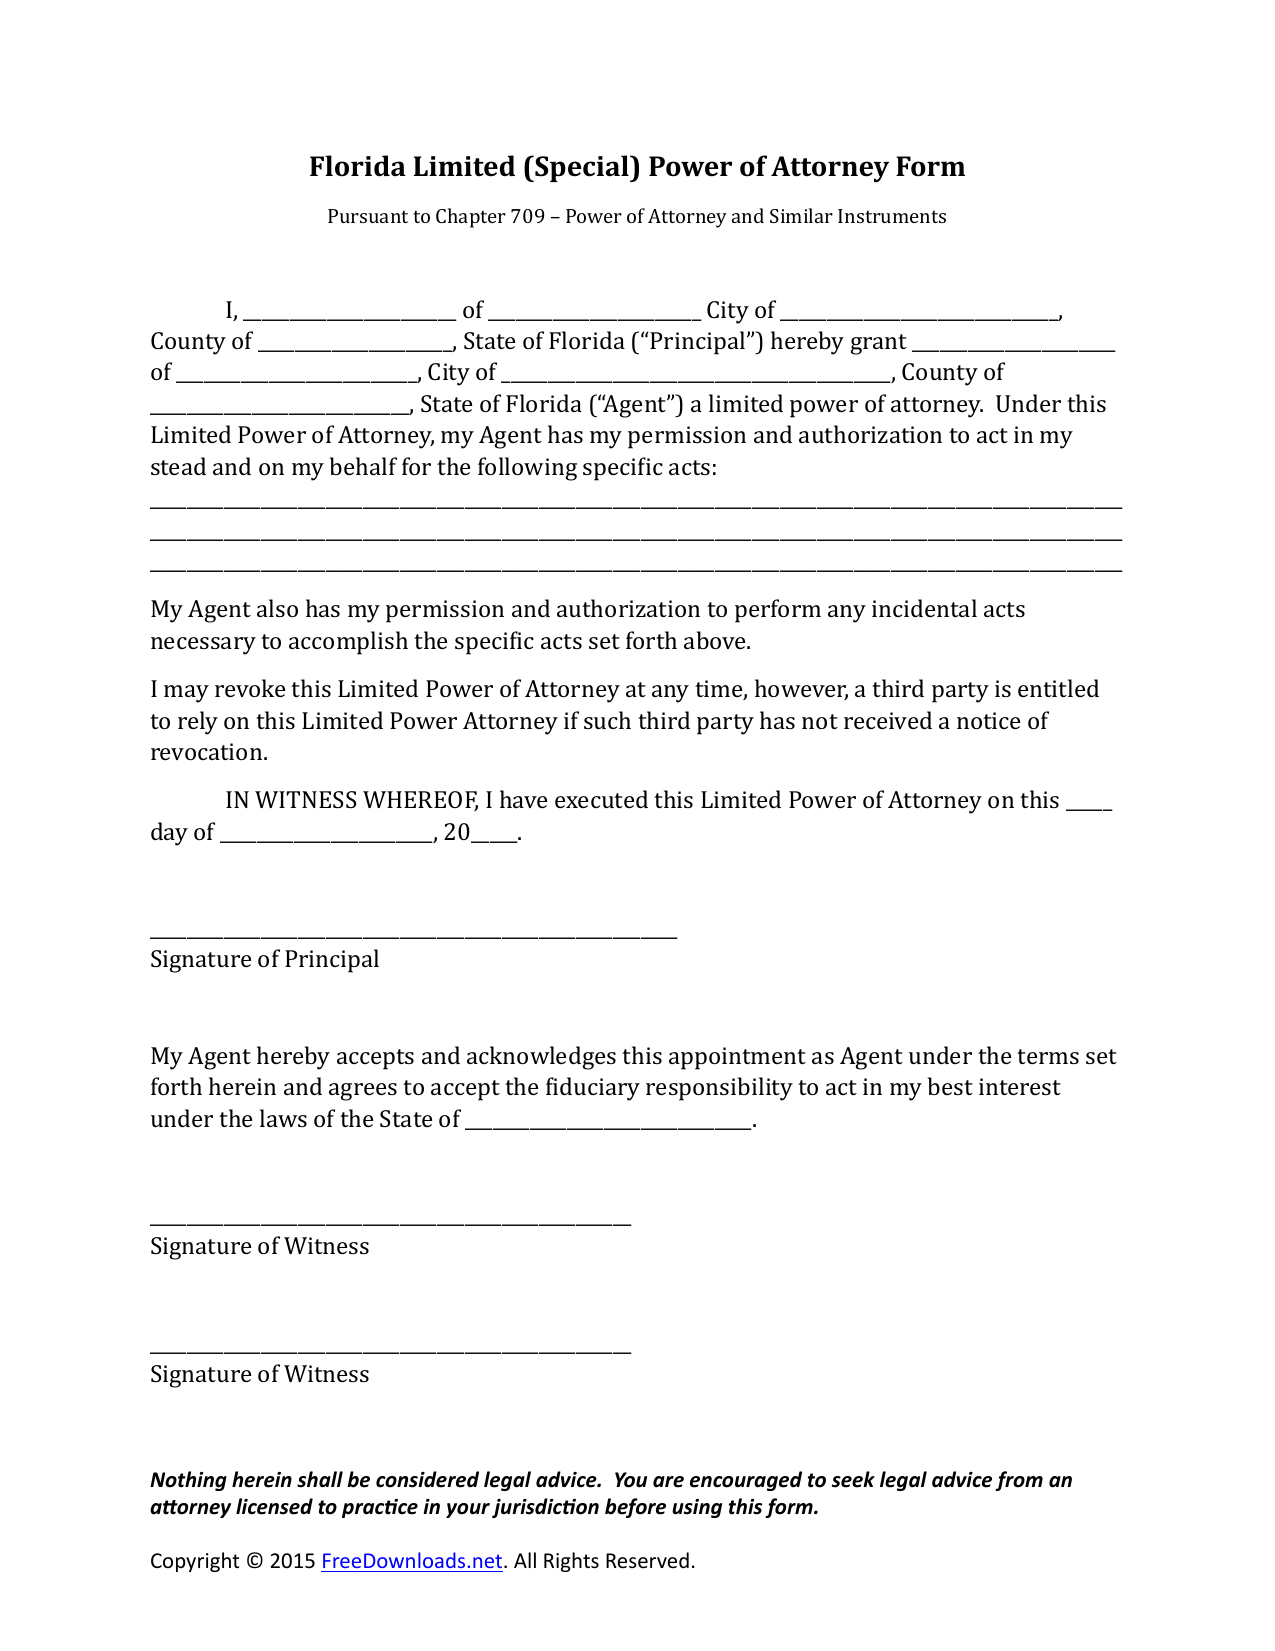 Download Florida Special (Limited) Power Of Attorney Form | Pdf - Free Printable Power Of Attorney Form Florida